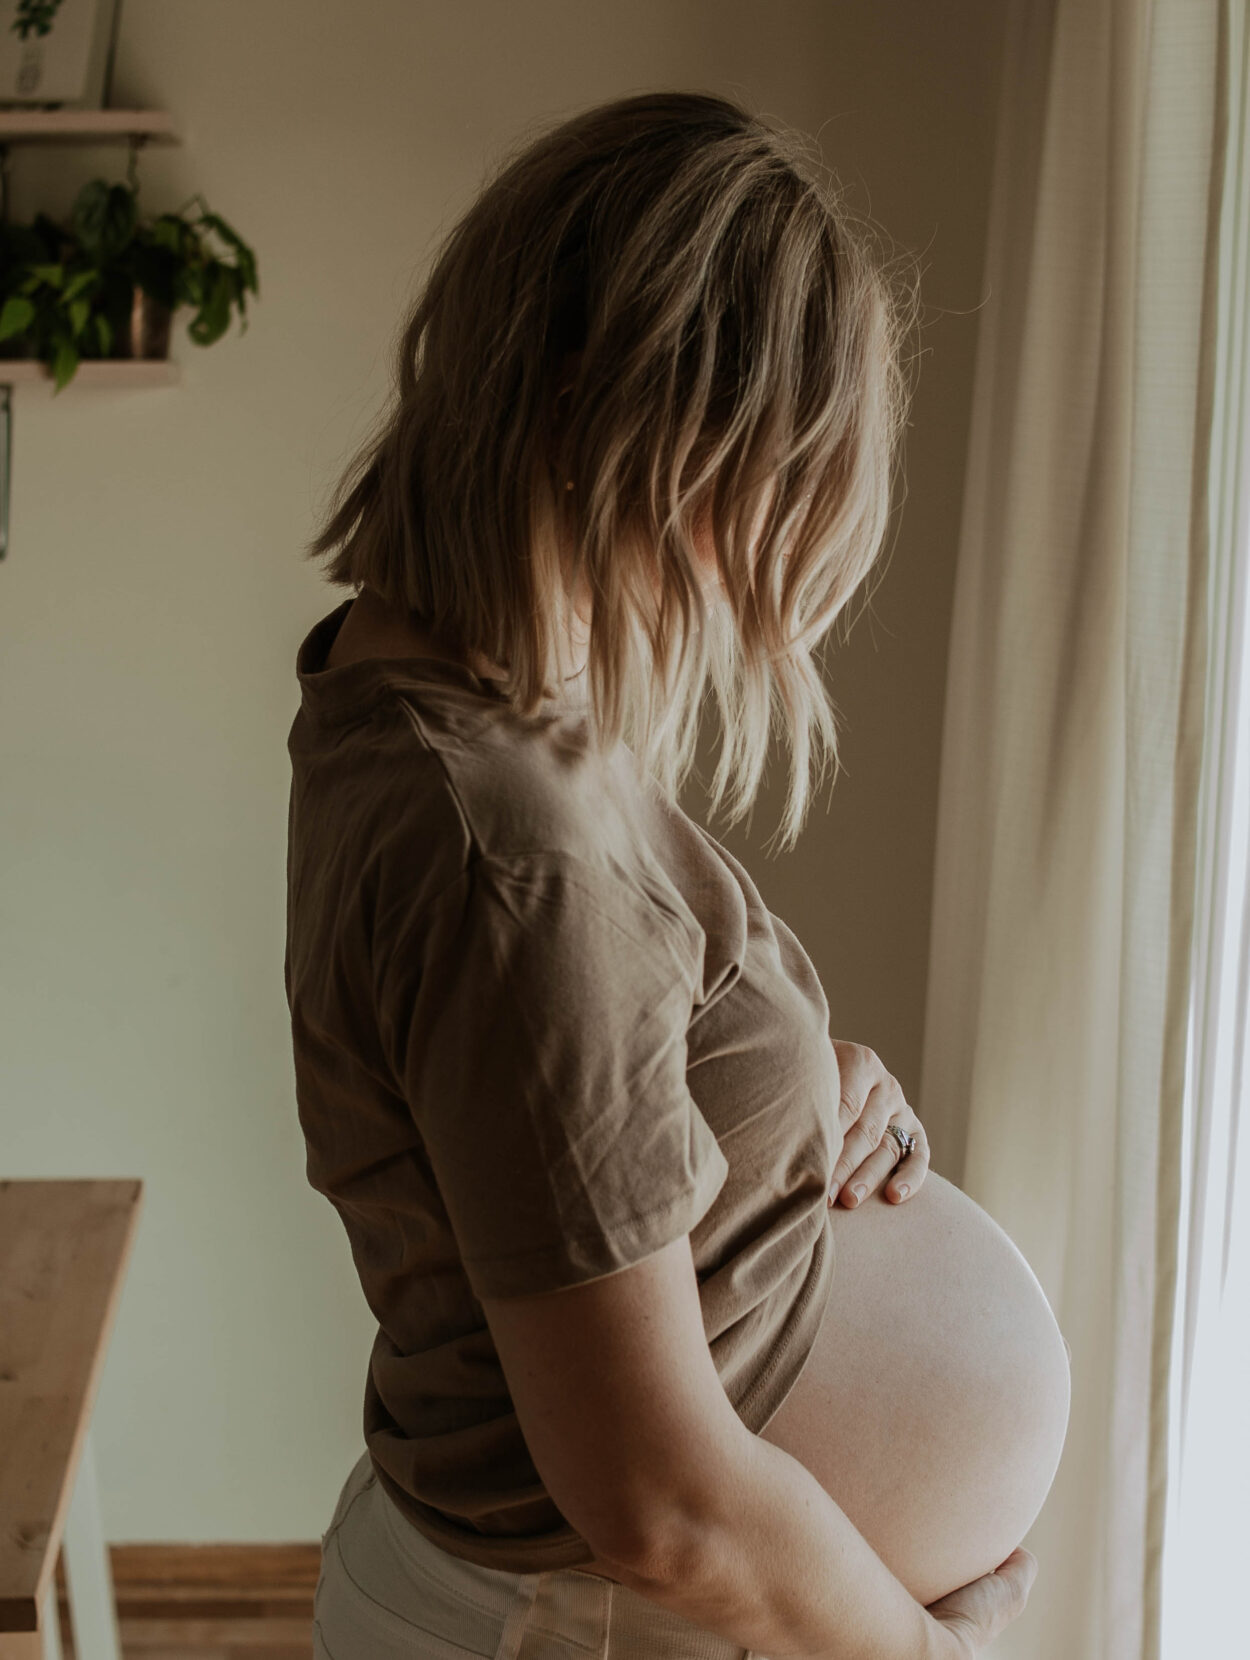 38 weeks pregnant, third trimester tips, baby bump